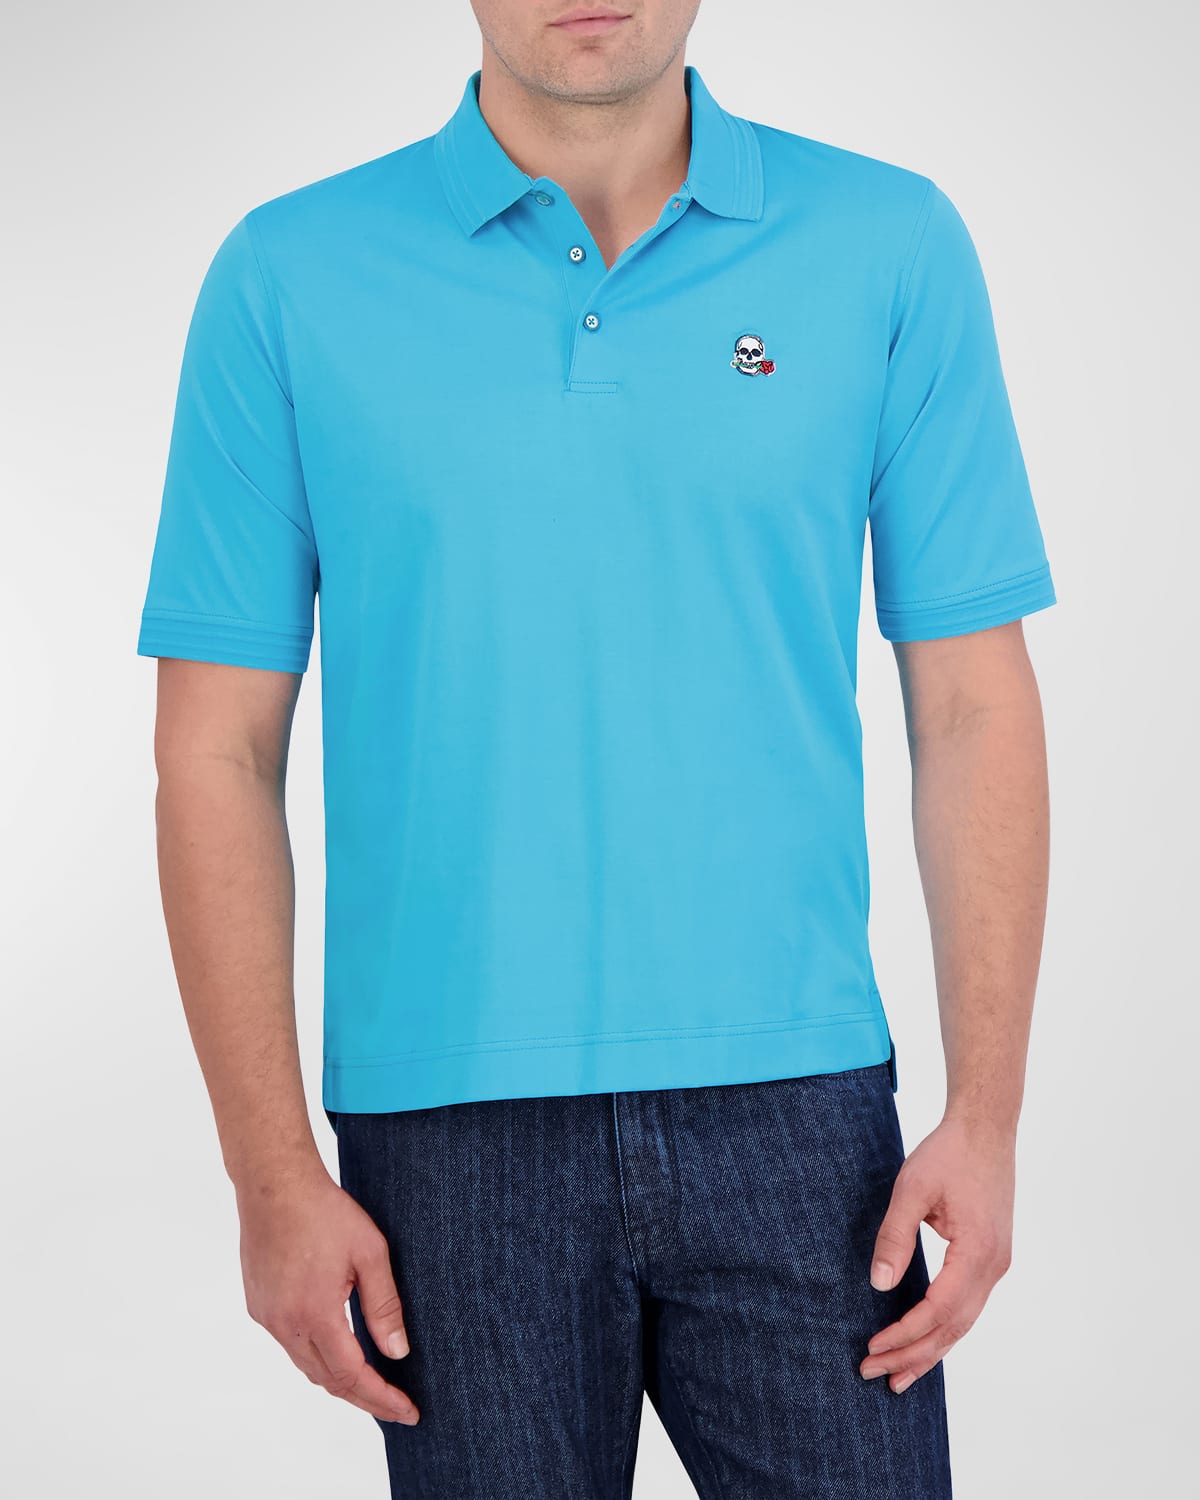 Men's The Player Knit Polo Shirt